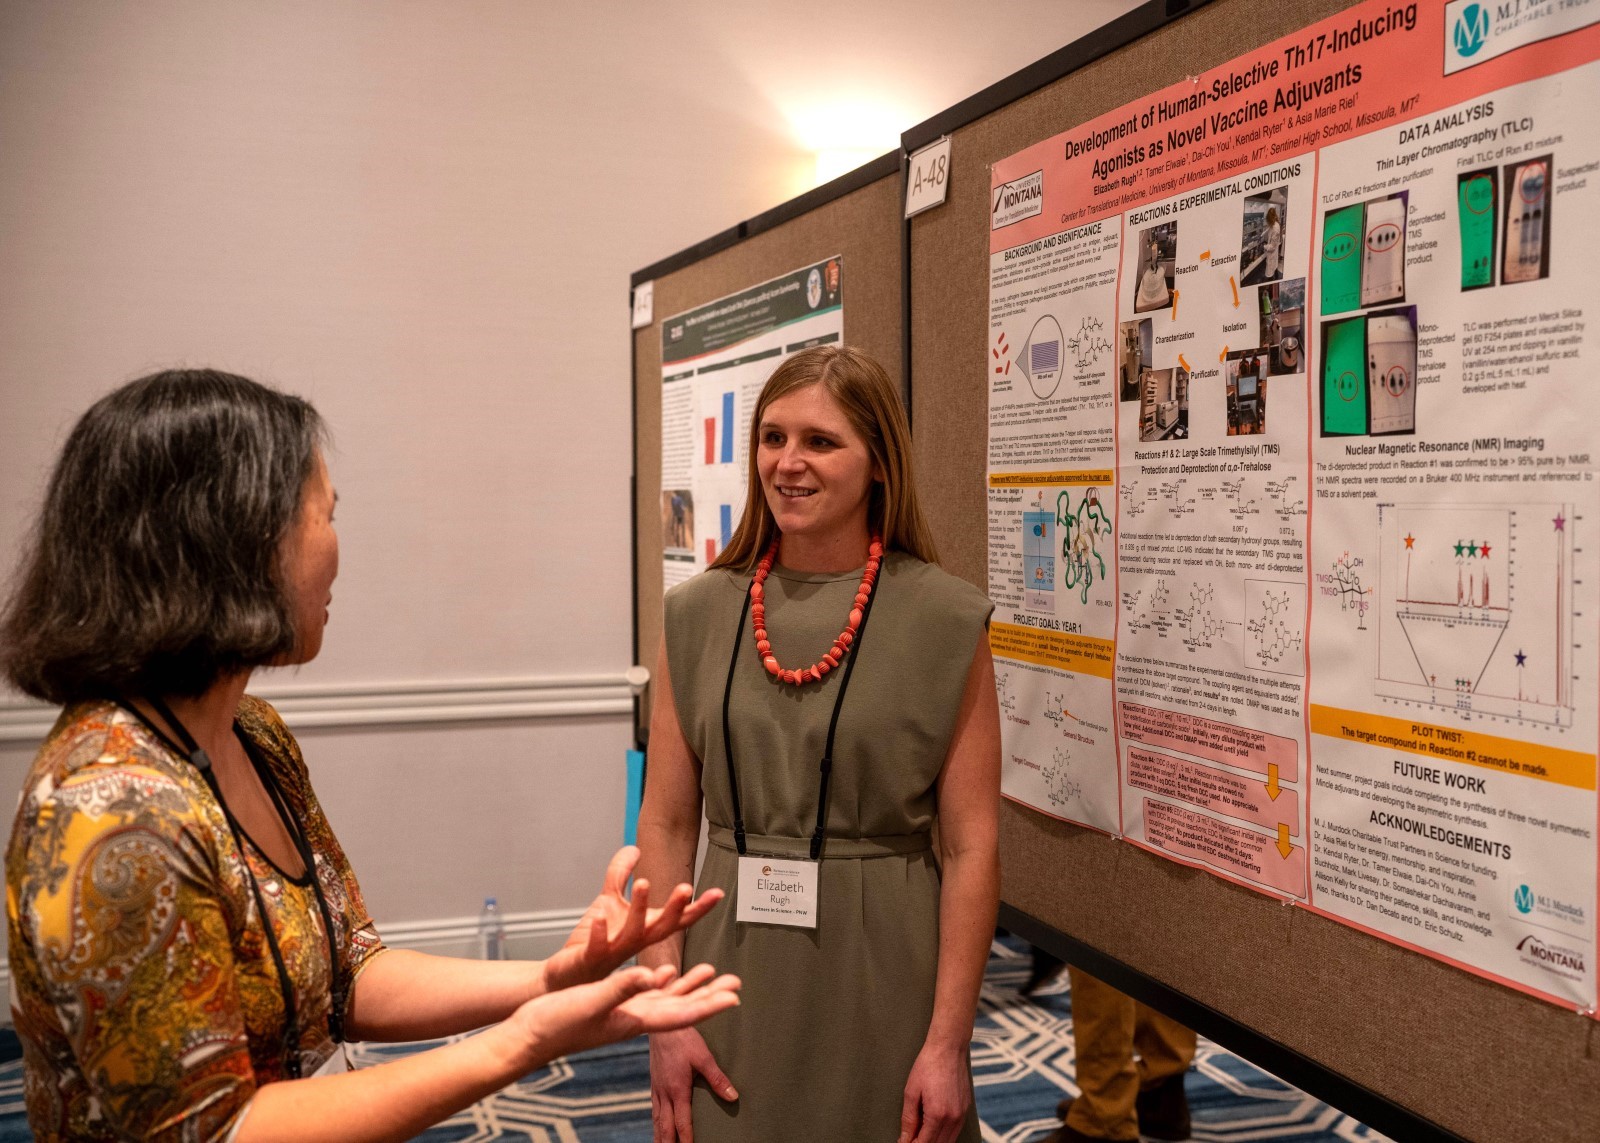 Two individuals engaging in a discussion at a scientific conference poster session. One person is standing by a poster that includes various graphs and diagrams related to vaccine development. 